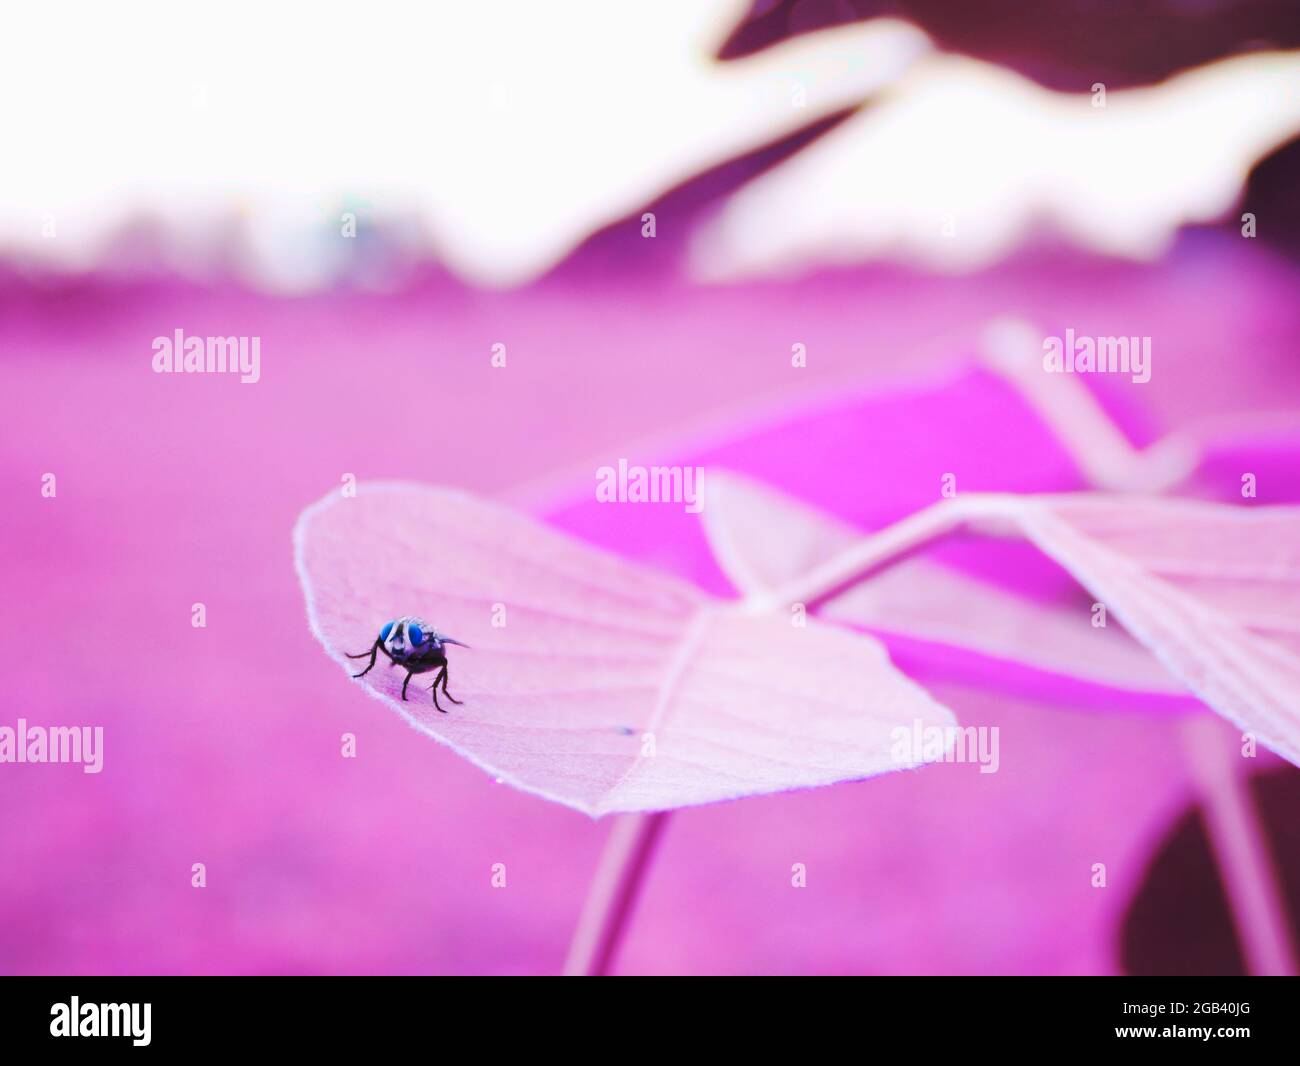 Asian fly insect sitting upon pink leaf, Nature background with text space, Indian creature lifestyle. Stock Photo